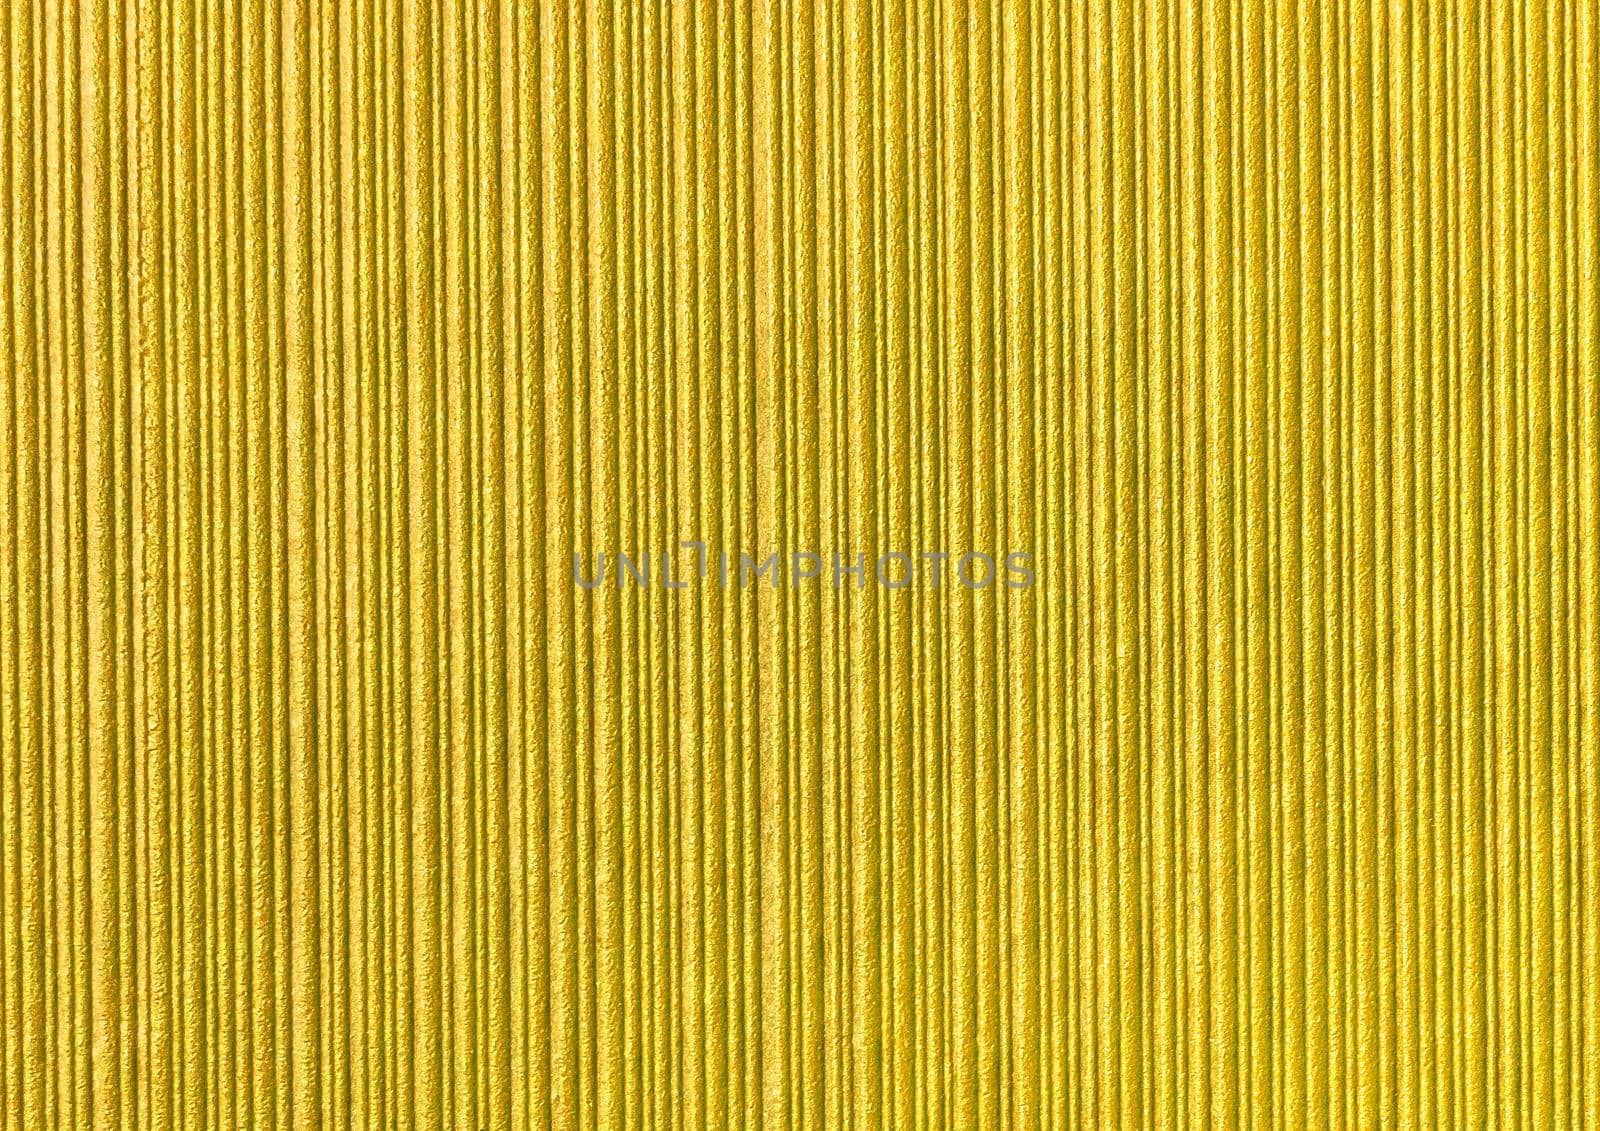 Yellow abstract striped pattern wallpaper background, gold paper texture with vertical lines by AYDO8